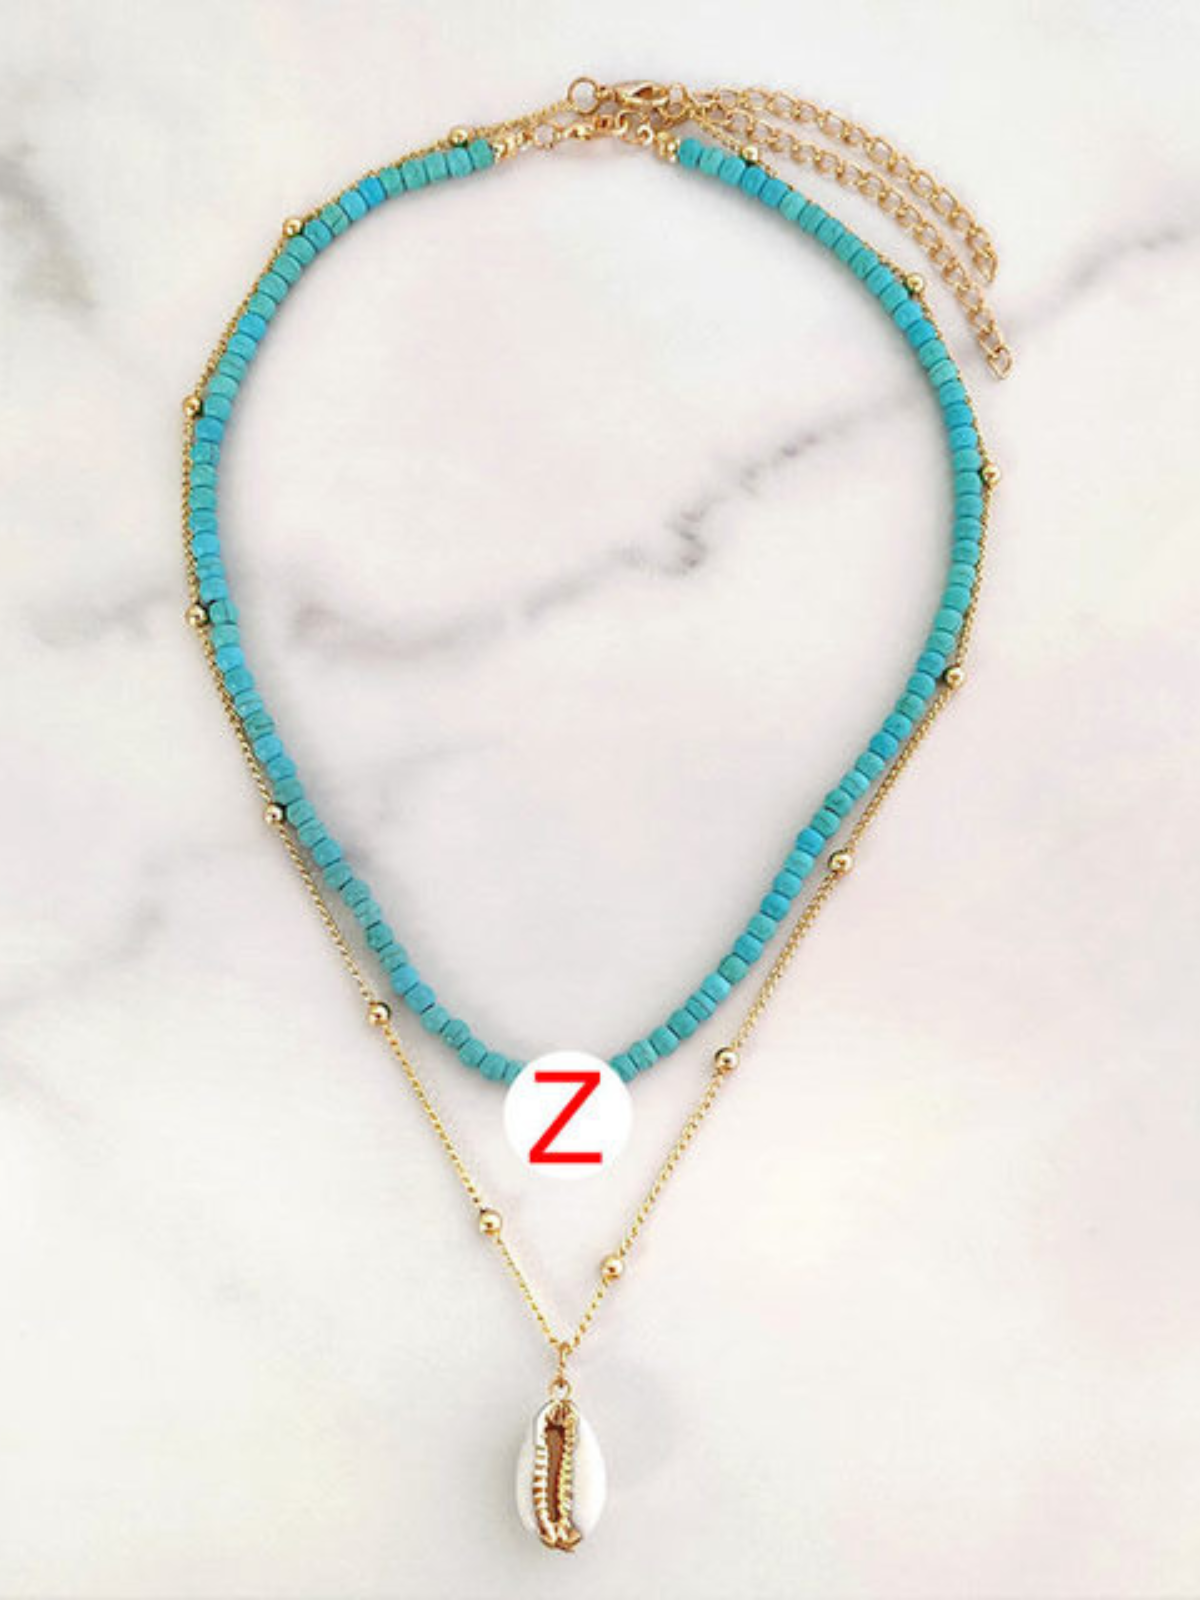 Girls Jewelry | Turquoise Beaded Initial Necklace | Mia Belle Girls